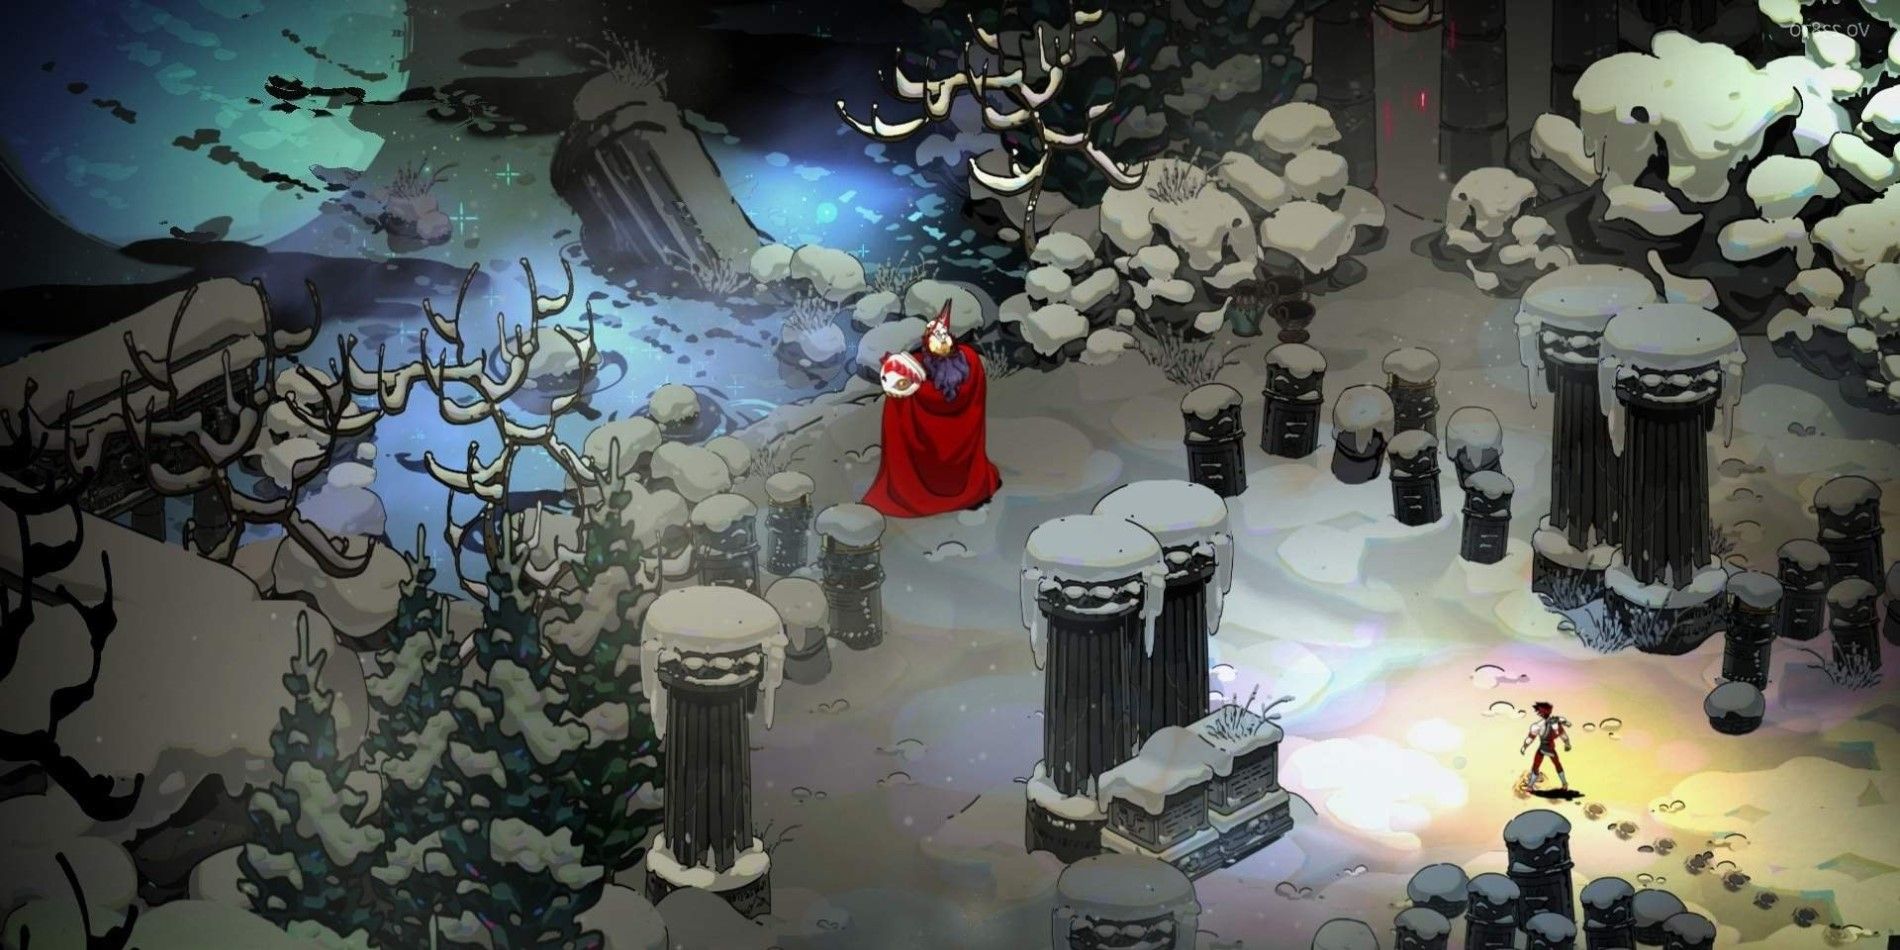 The beginning of the final battle of Hades against Hades himself, with Zagreus and Hades standing in a field in the snow